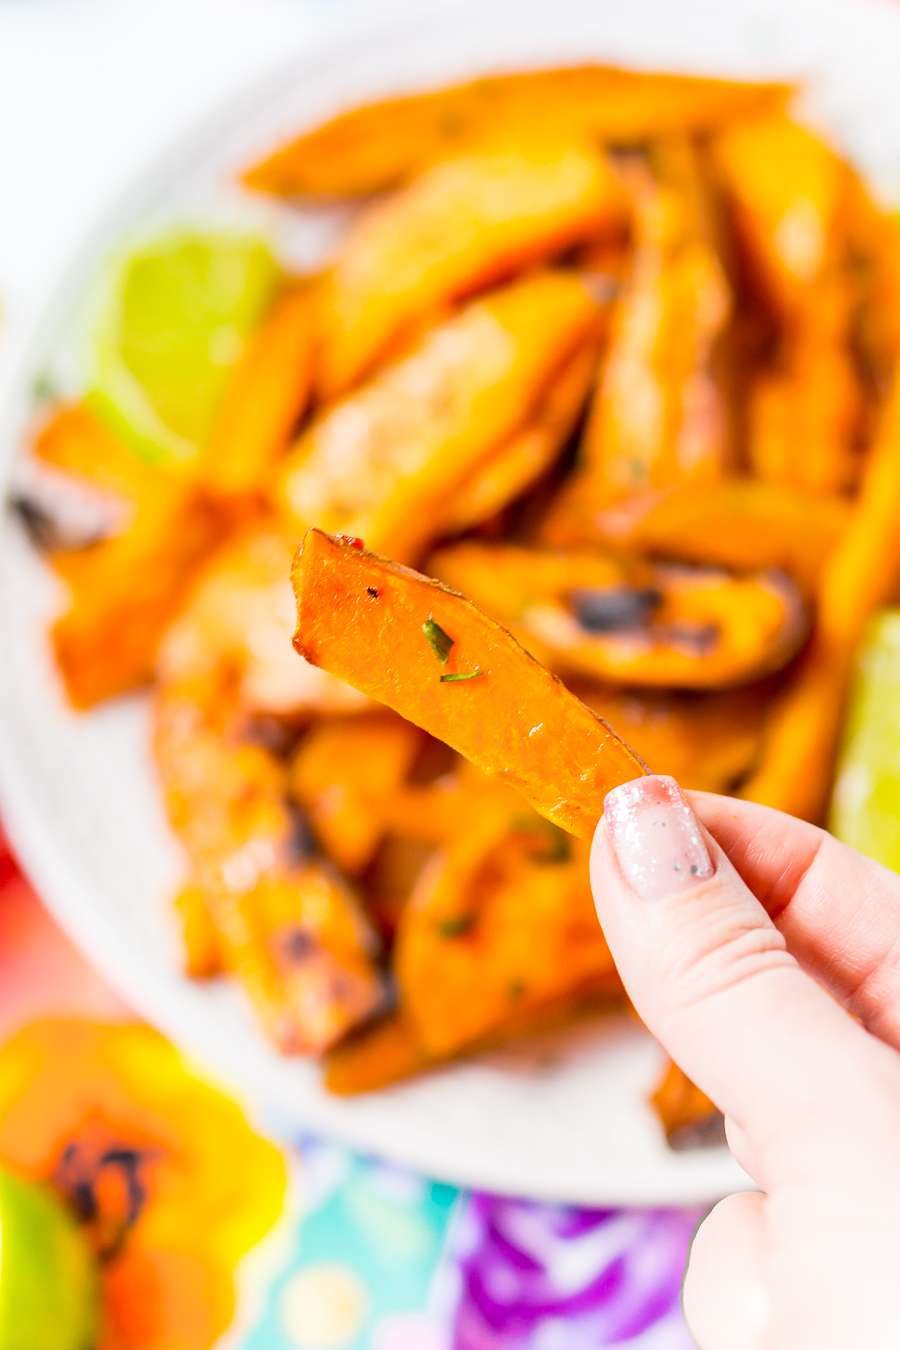 Chile Lime Sweet Potato Wedges are lighter than fries and potato skins, but just as delicious. With a squeeze of lime, a dash of garlic, and a kick of chile, this side is so flavorful, you won’t miss the extra calories!